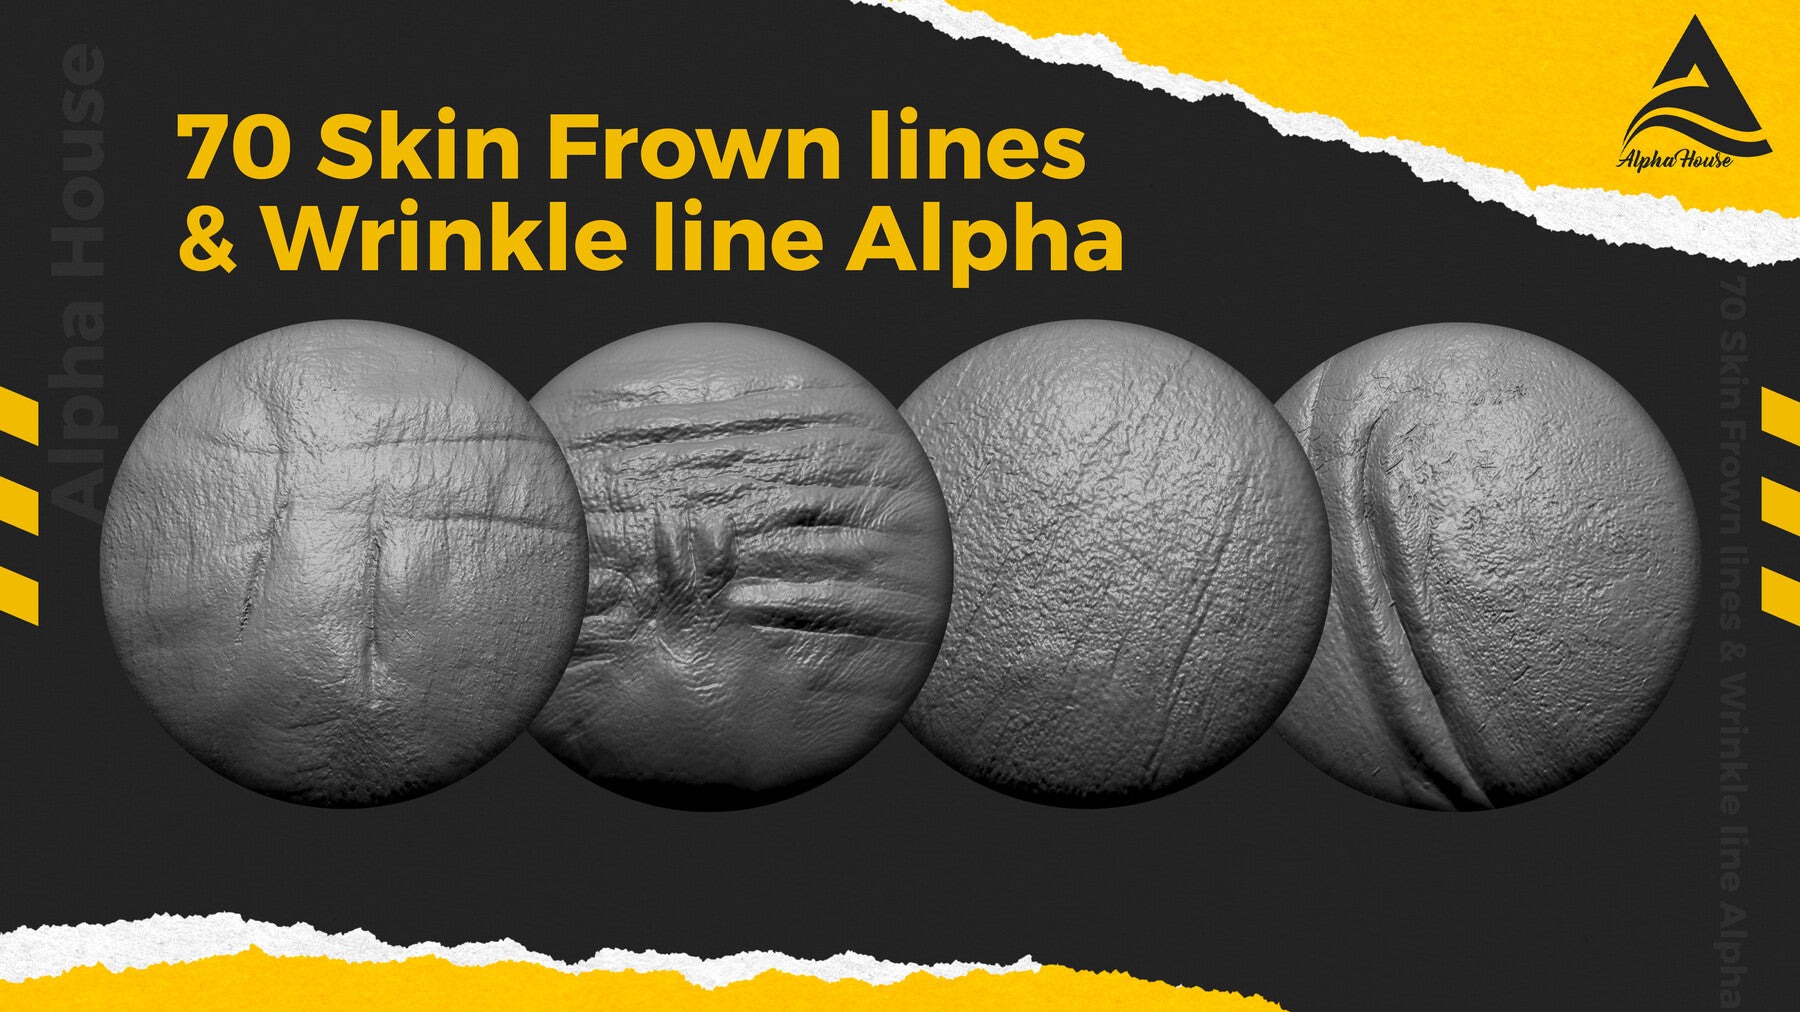 70 Skin Frown lines and Wrinkle line Alpha